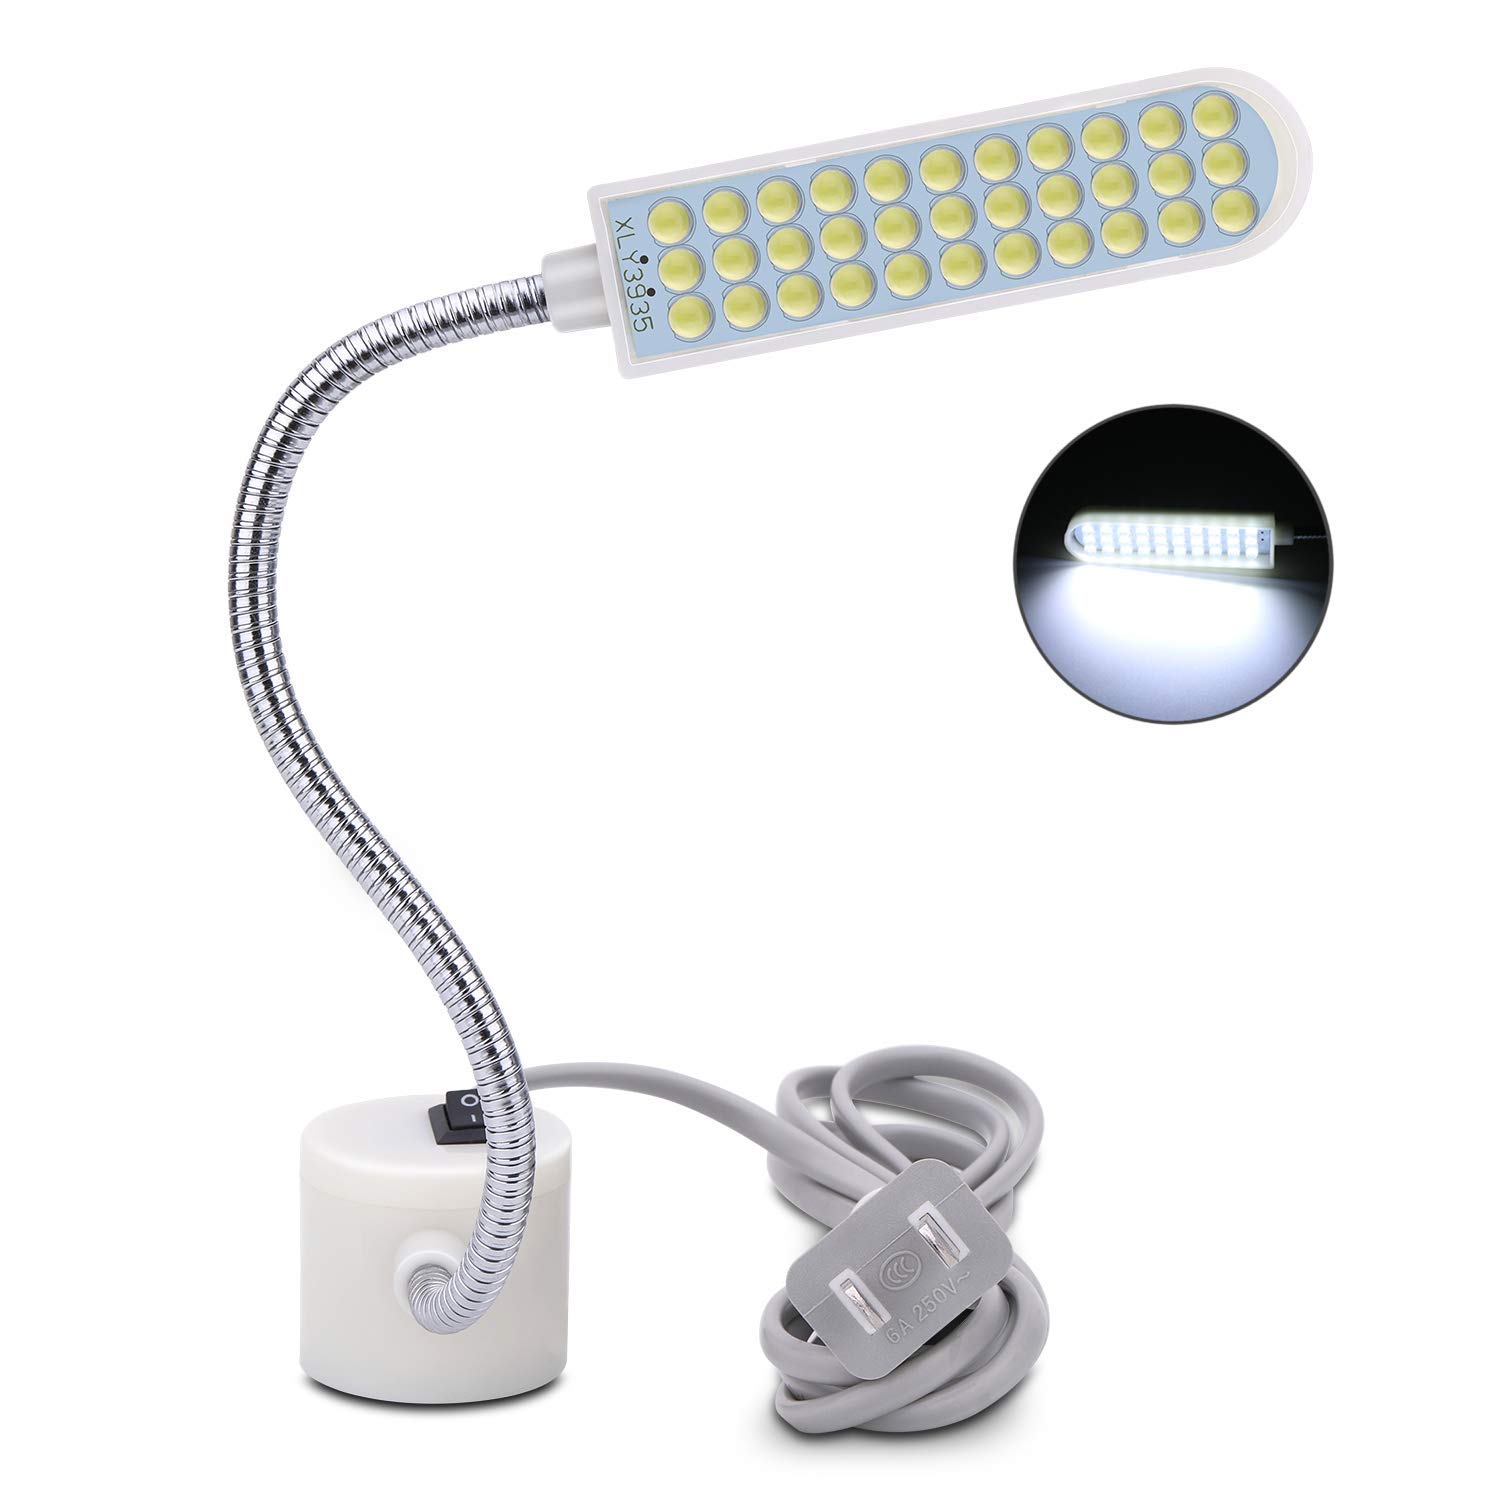 harmiey Sewing Machine Light (36LED) Gooseneck Work Light with Magnetic Mounting Base, White Soft Light for Lathes, Drill Presses, Workbenches